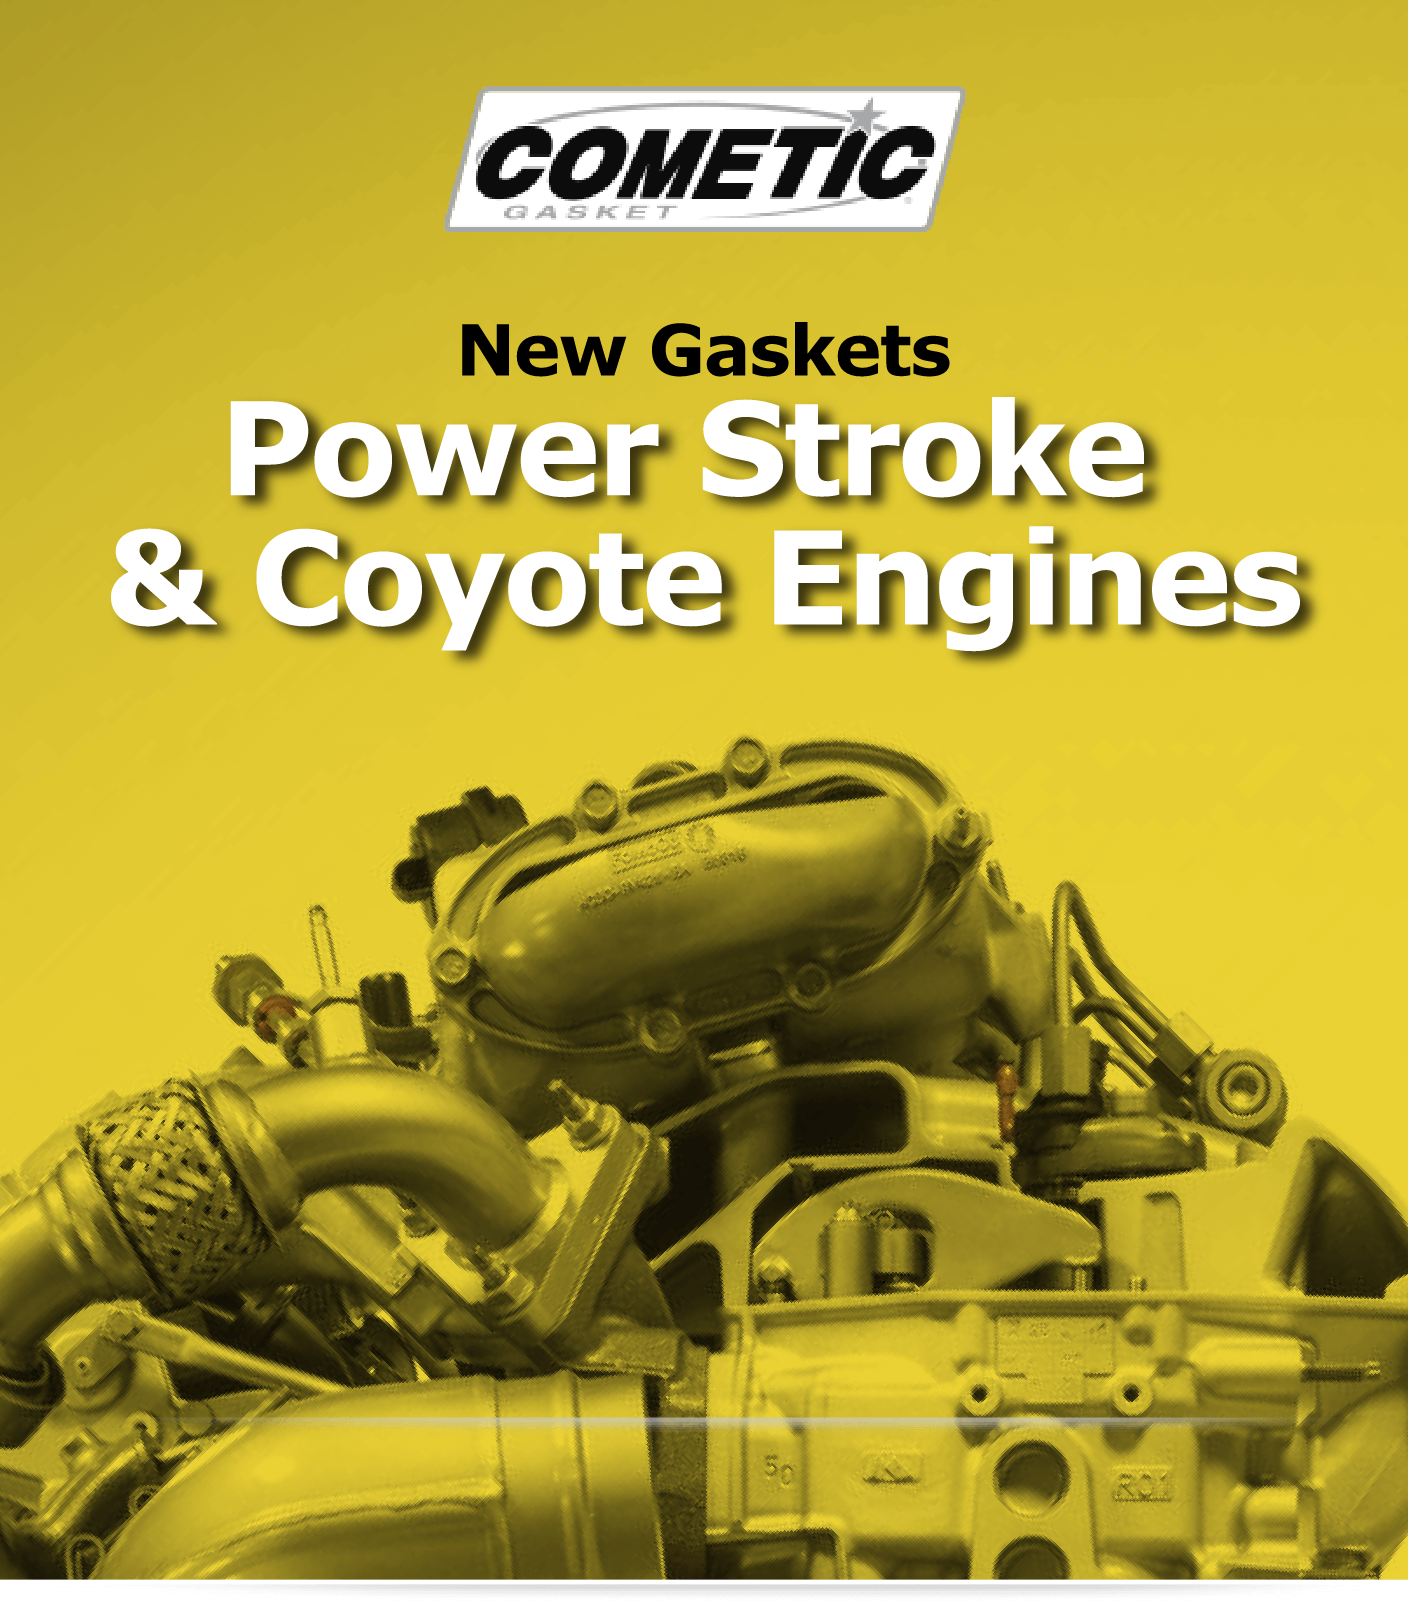 power-stroke-coyote-engines